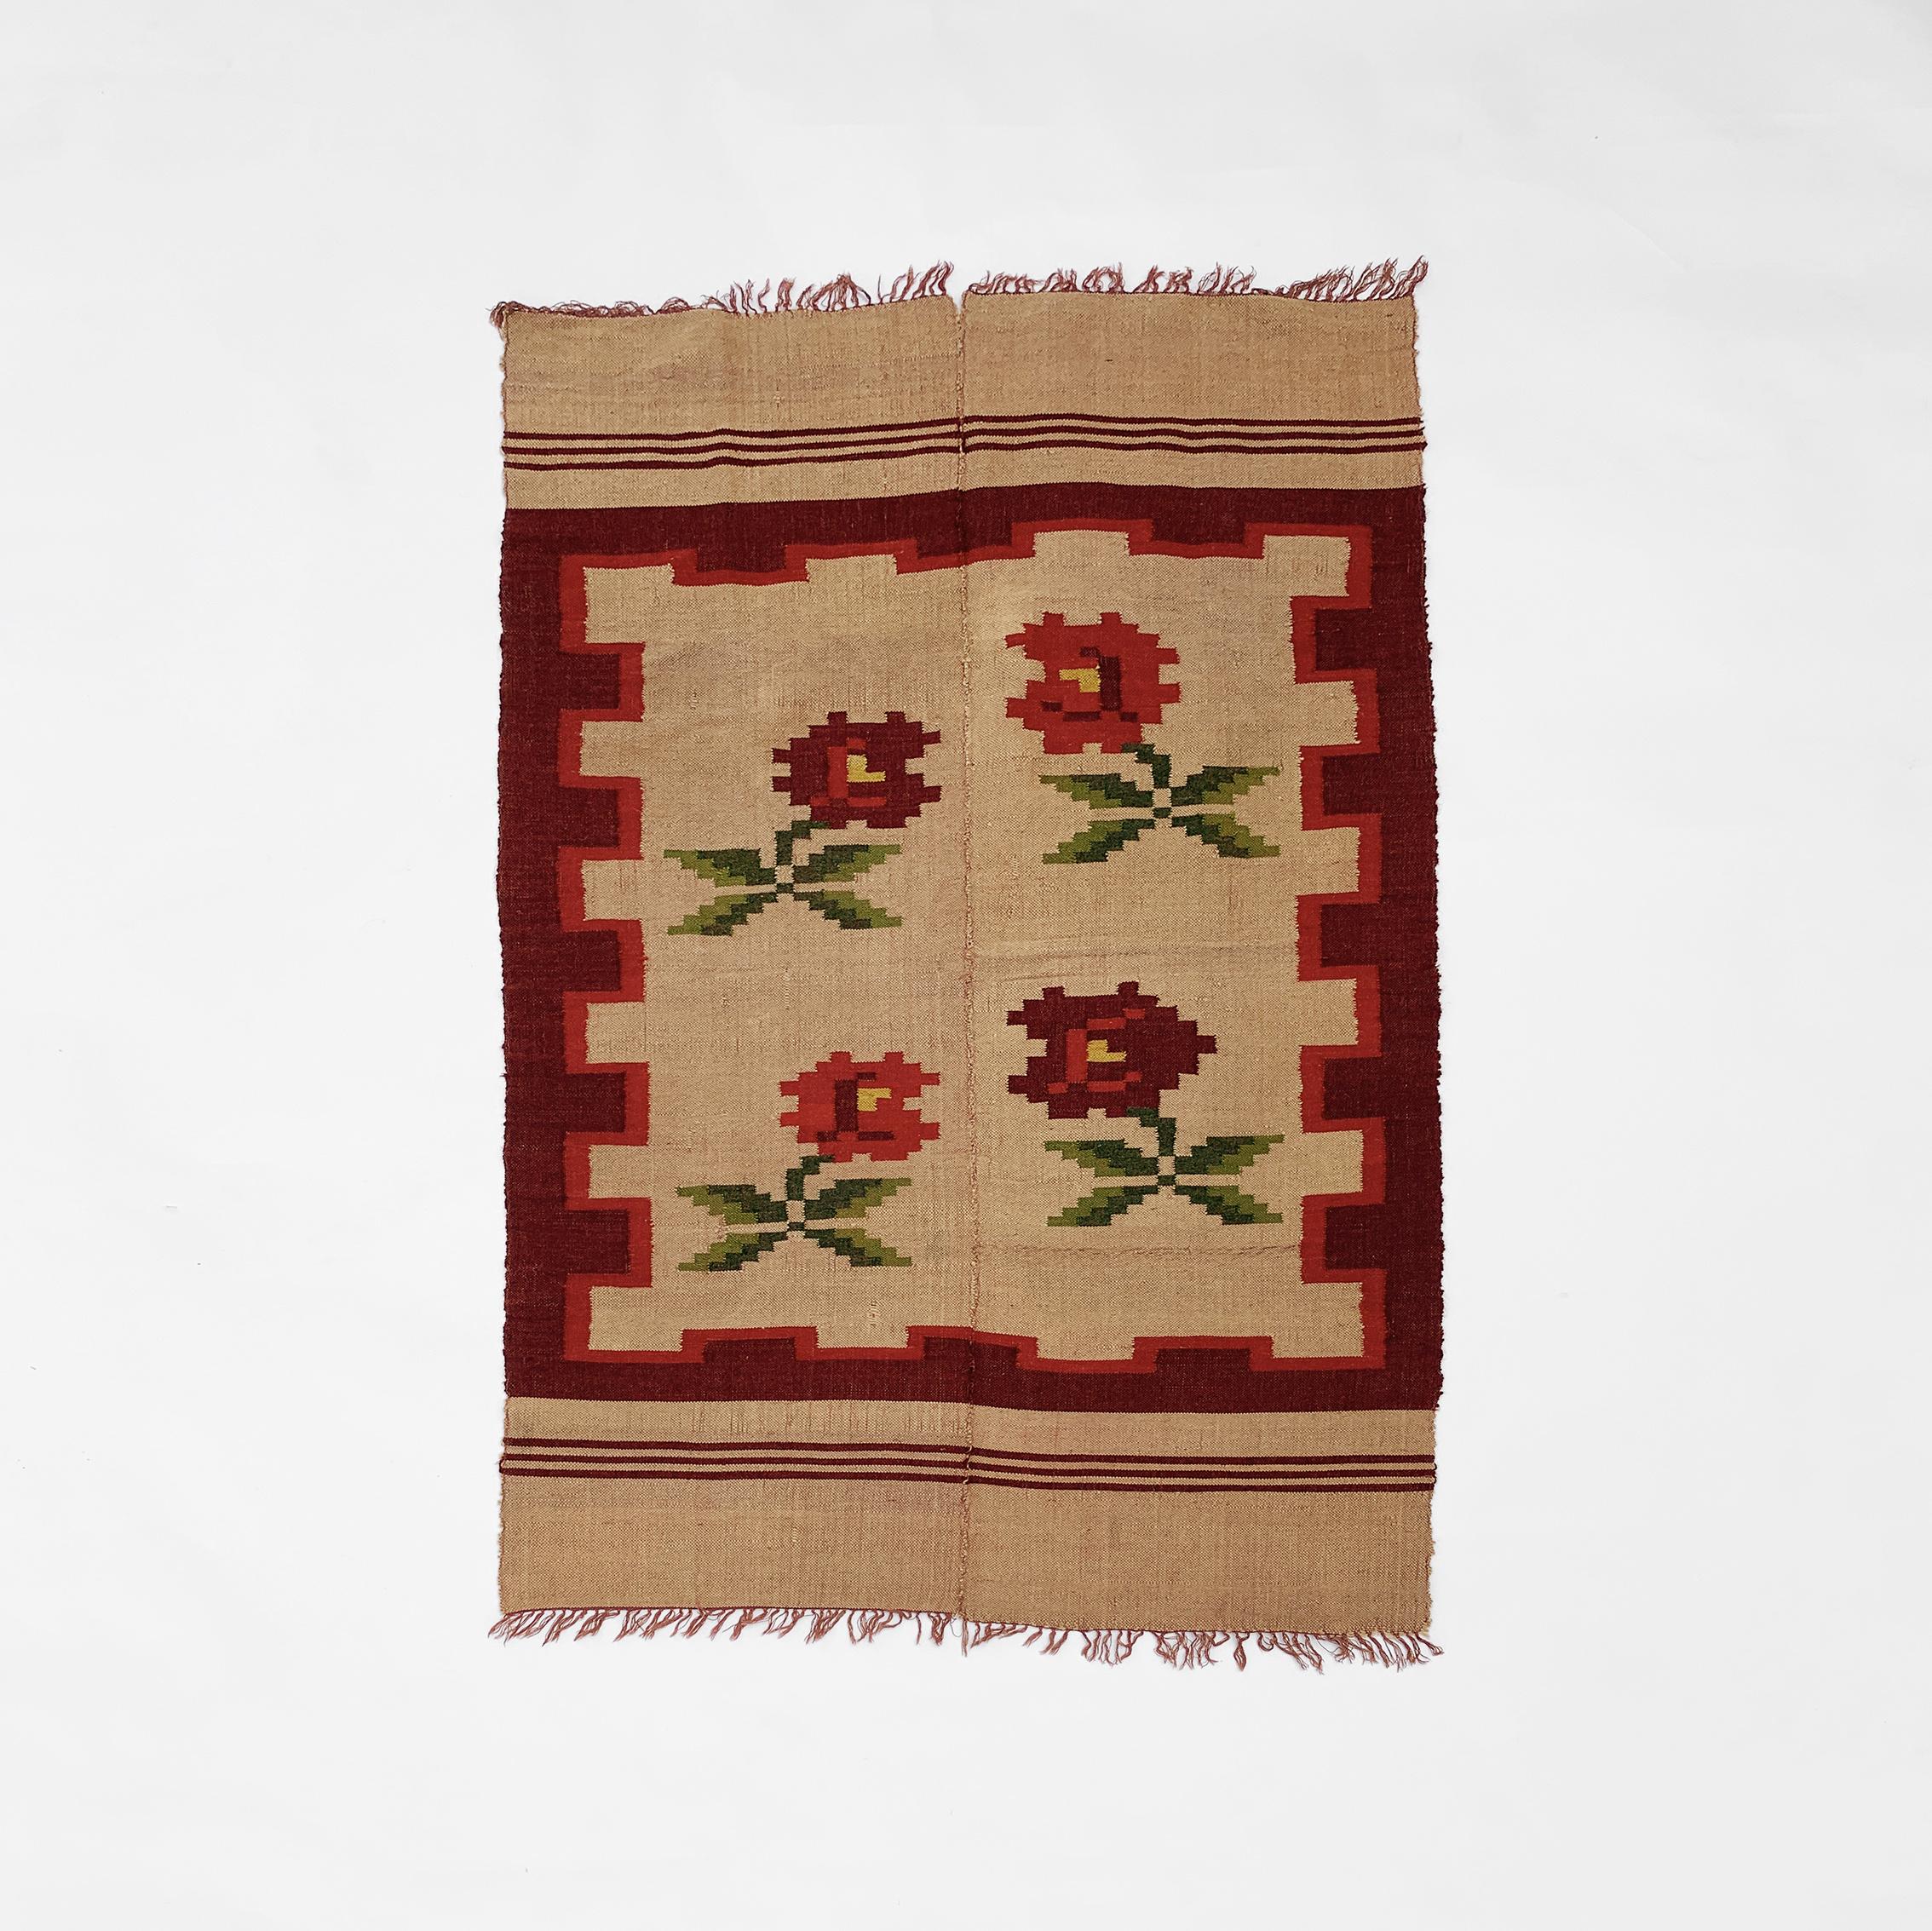 A small rug, imported from Greece, and featuring a red rose pattern on a tan background. This piece is handwoven from organic wool, and consists of two identically sized panels, hand-stitched together to create a larger rug. This technique was